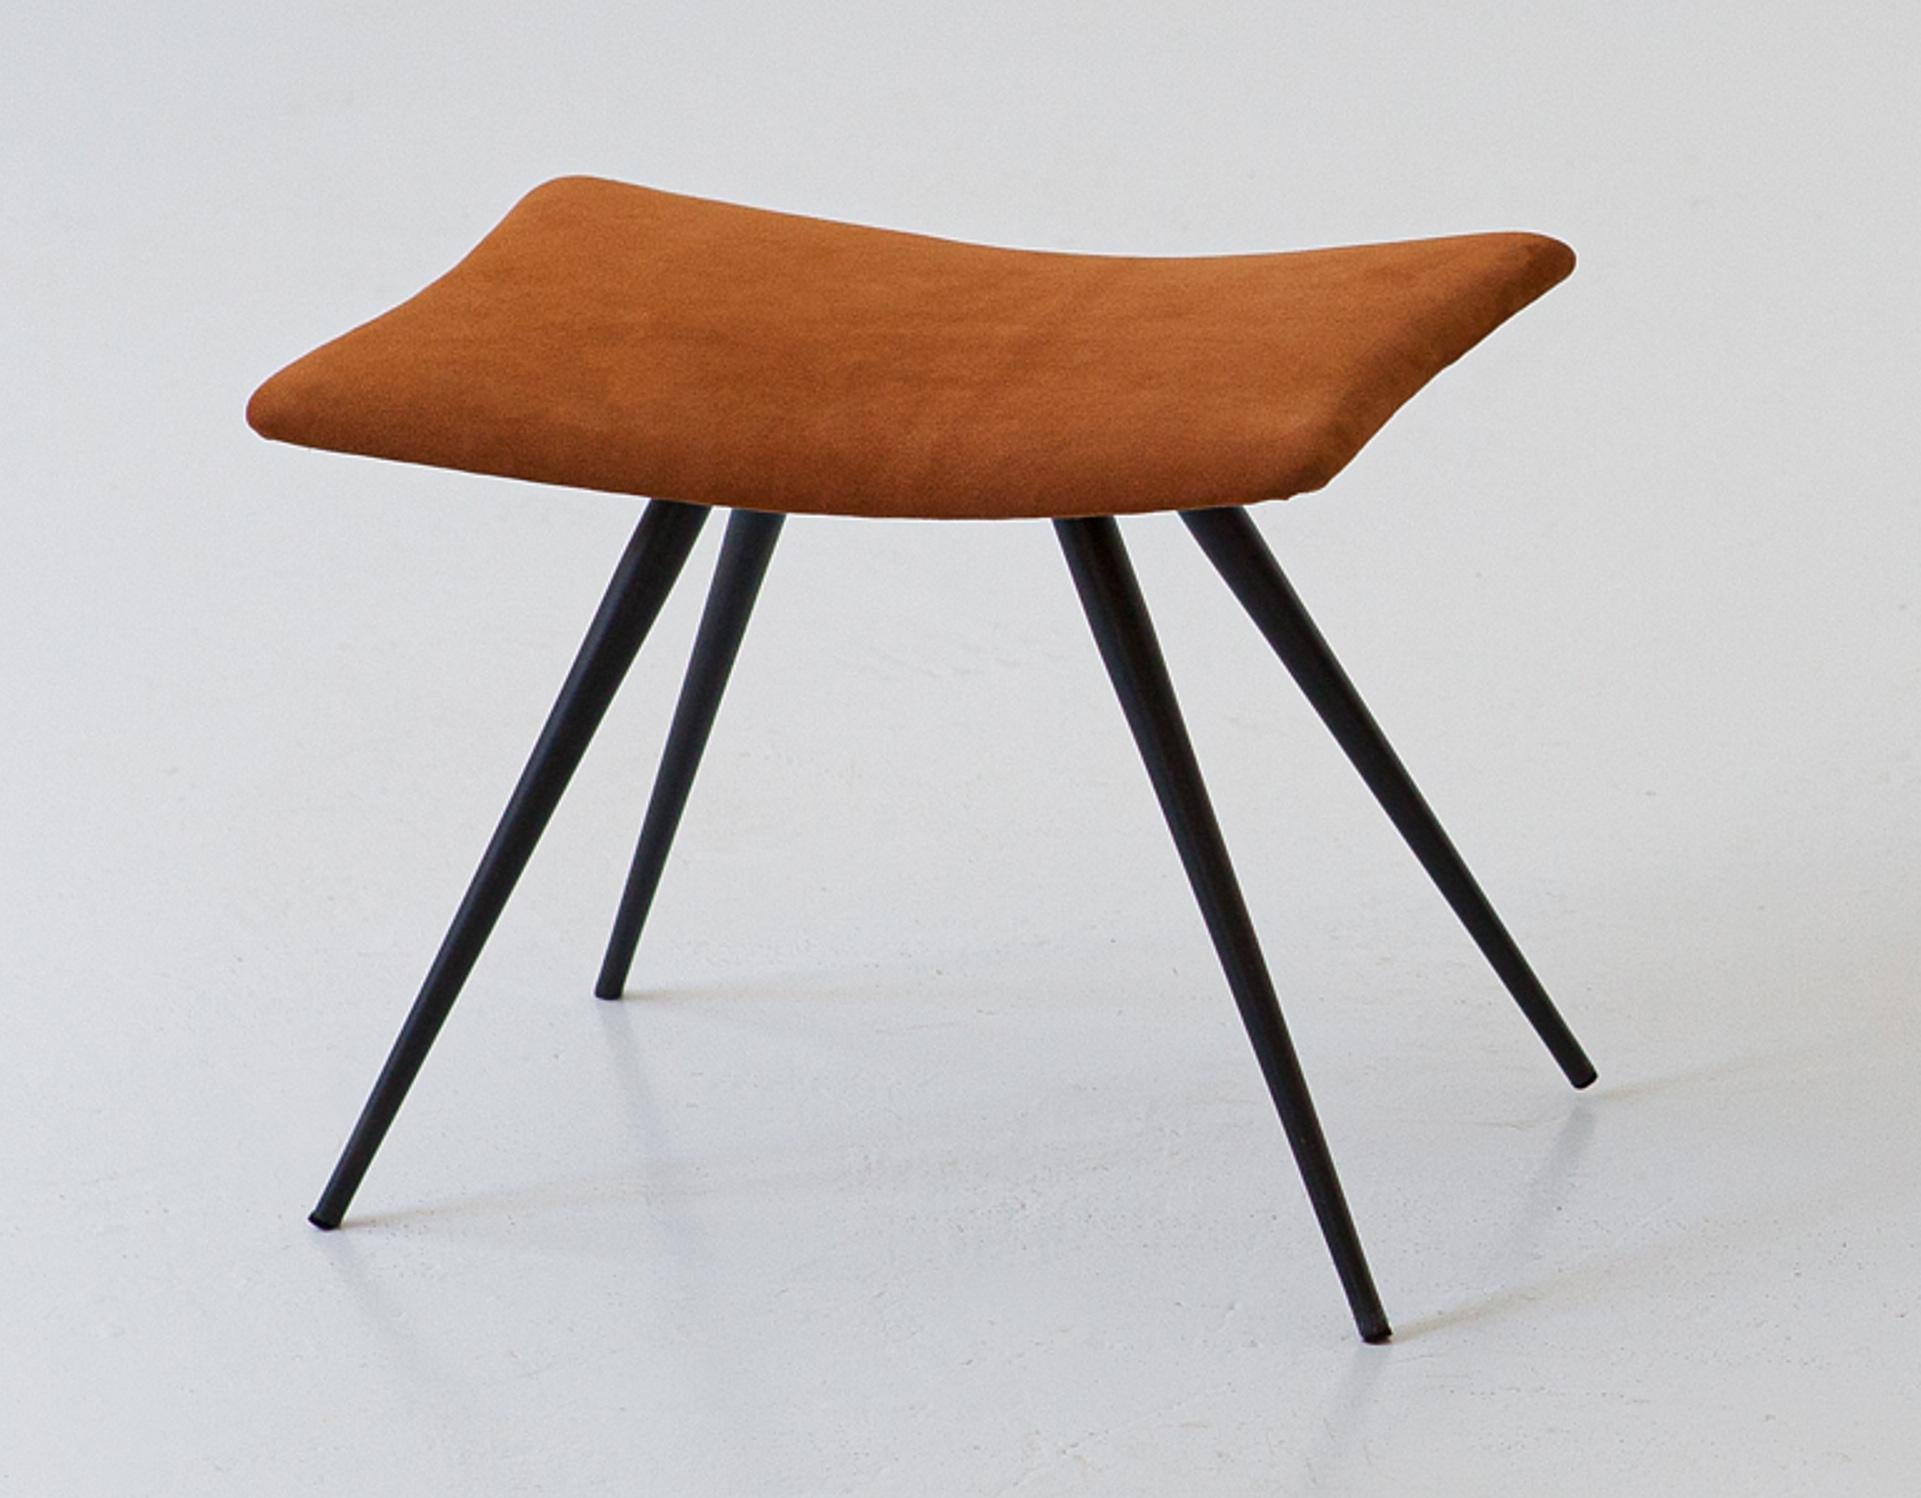 Italian Stool in Cognac Suede Leather and Black Steel Conical Legs, 1950s For Sale 2